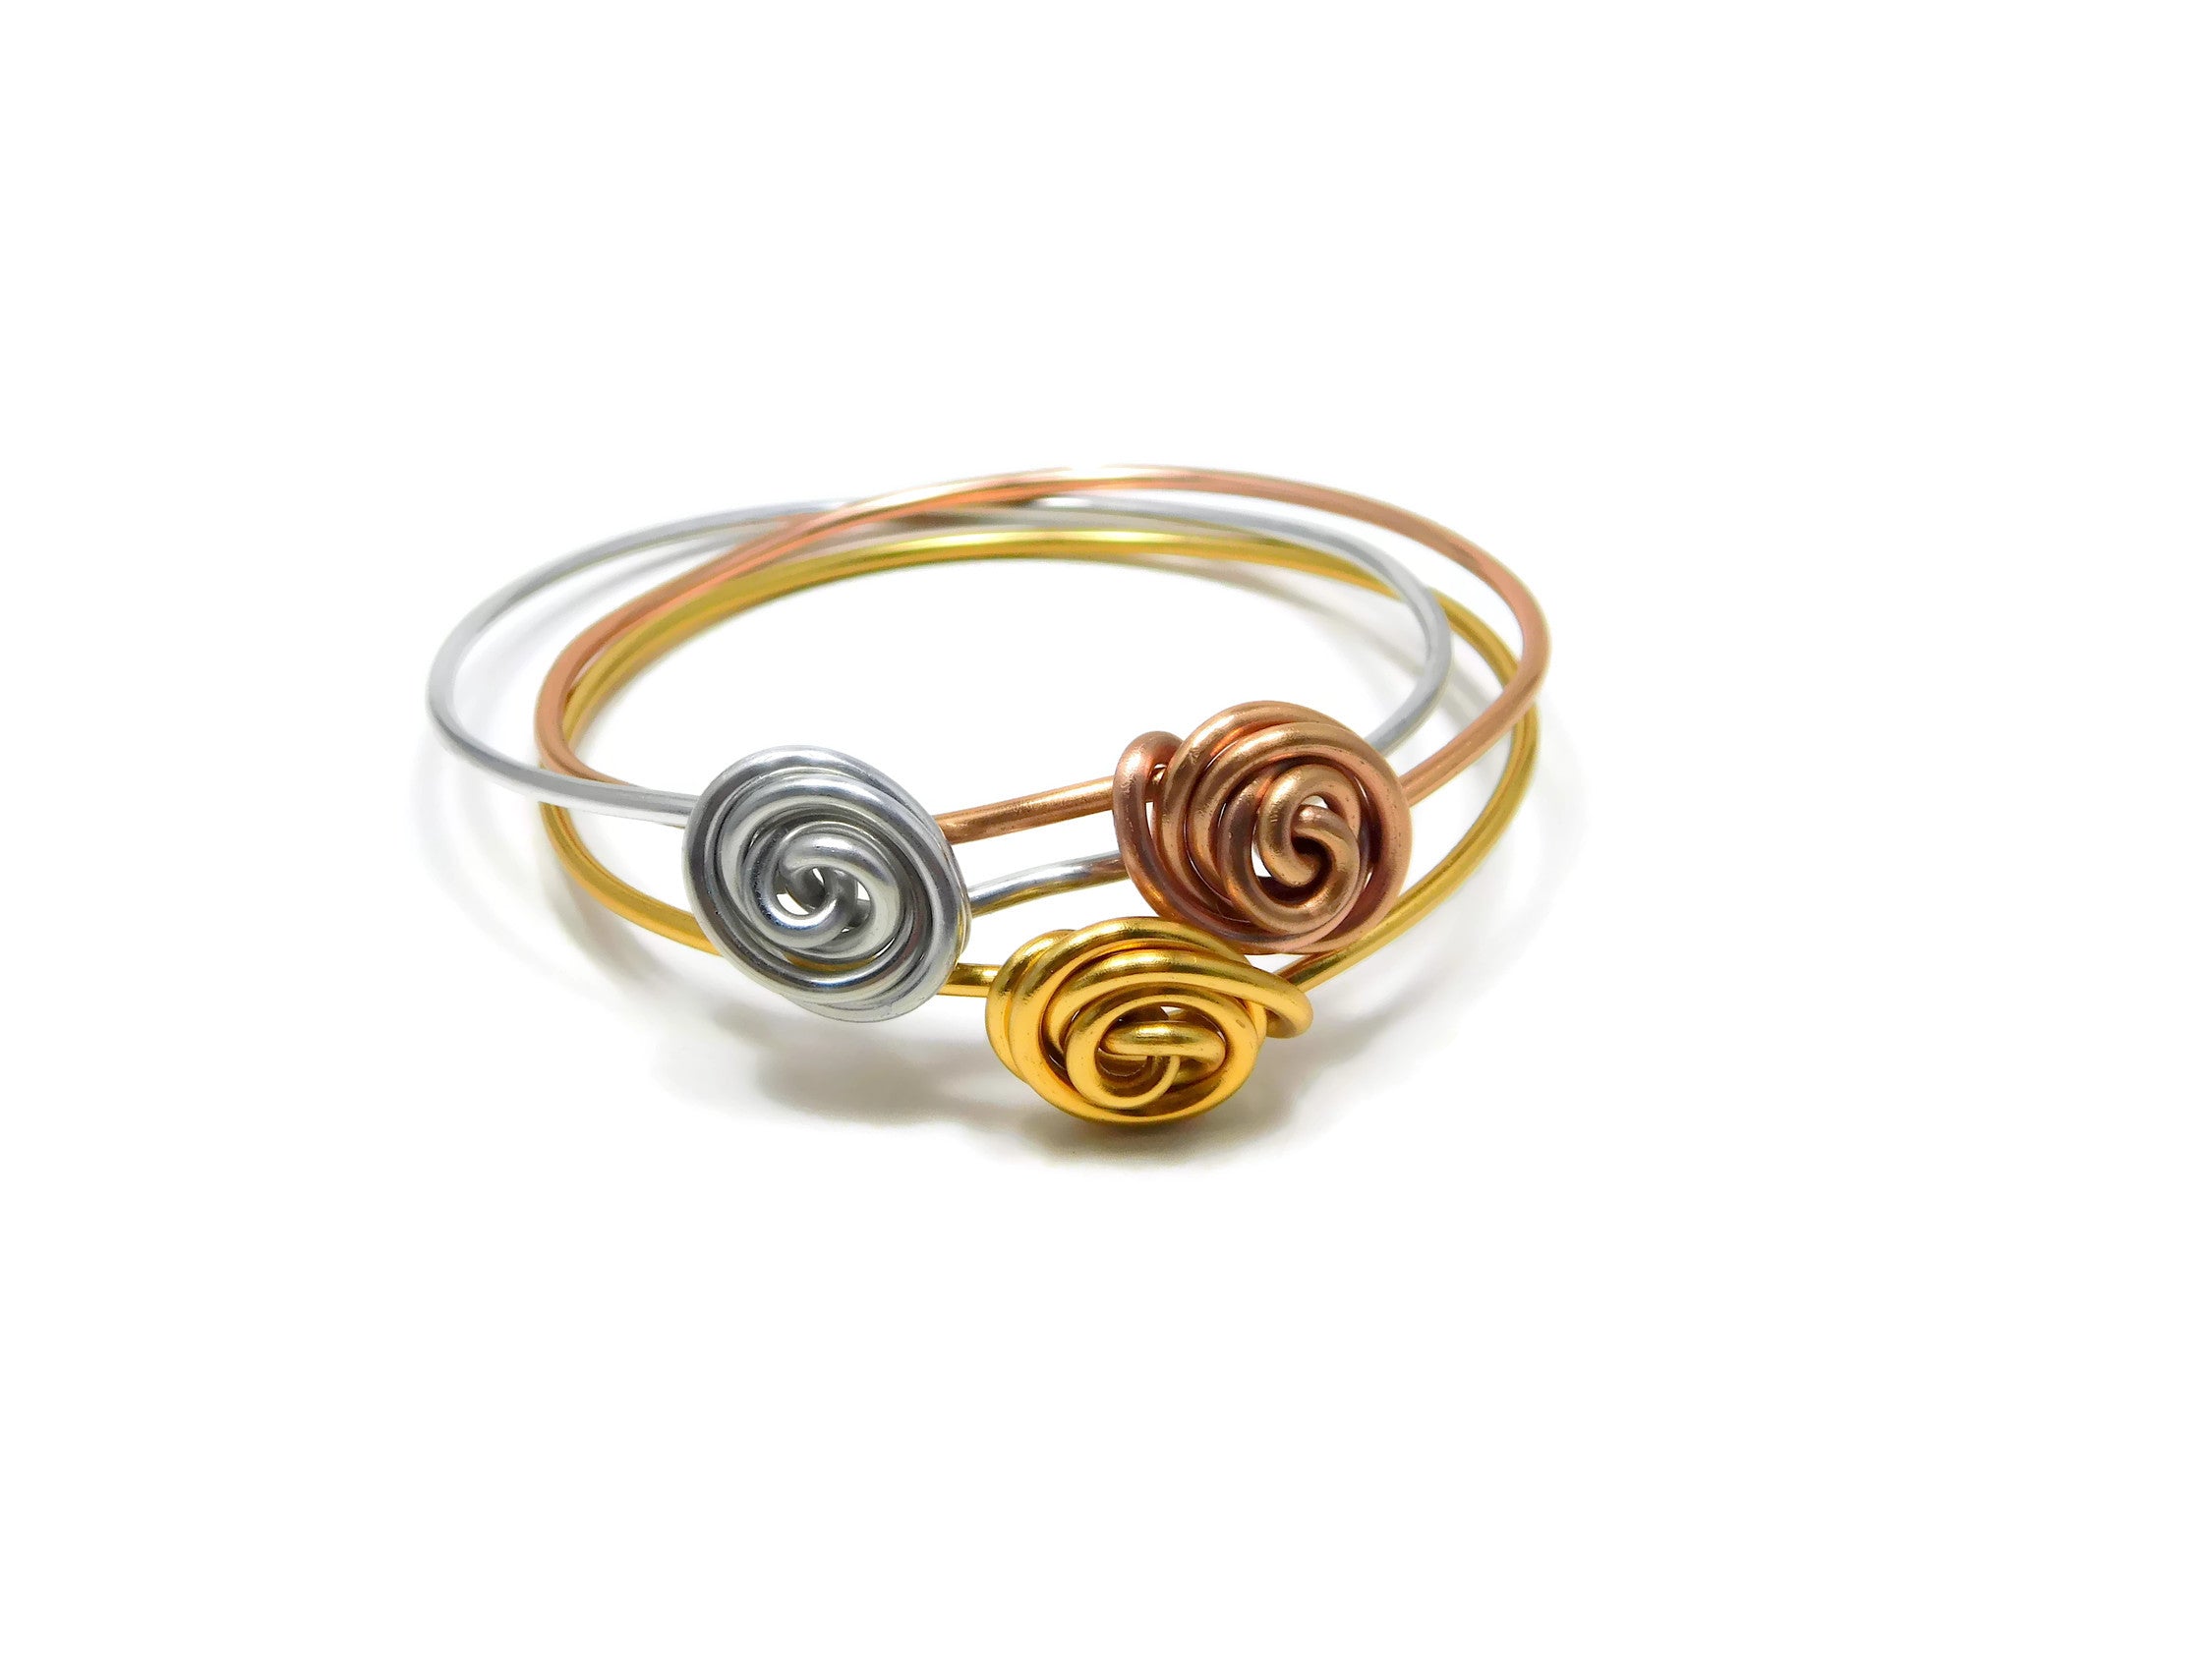 Stackable Rosette Bangle Bracelet Materials Only for Wire Wrapping